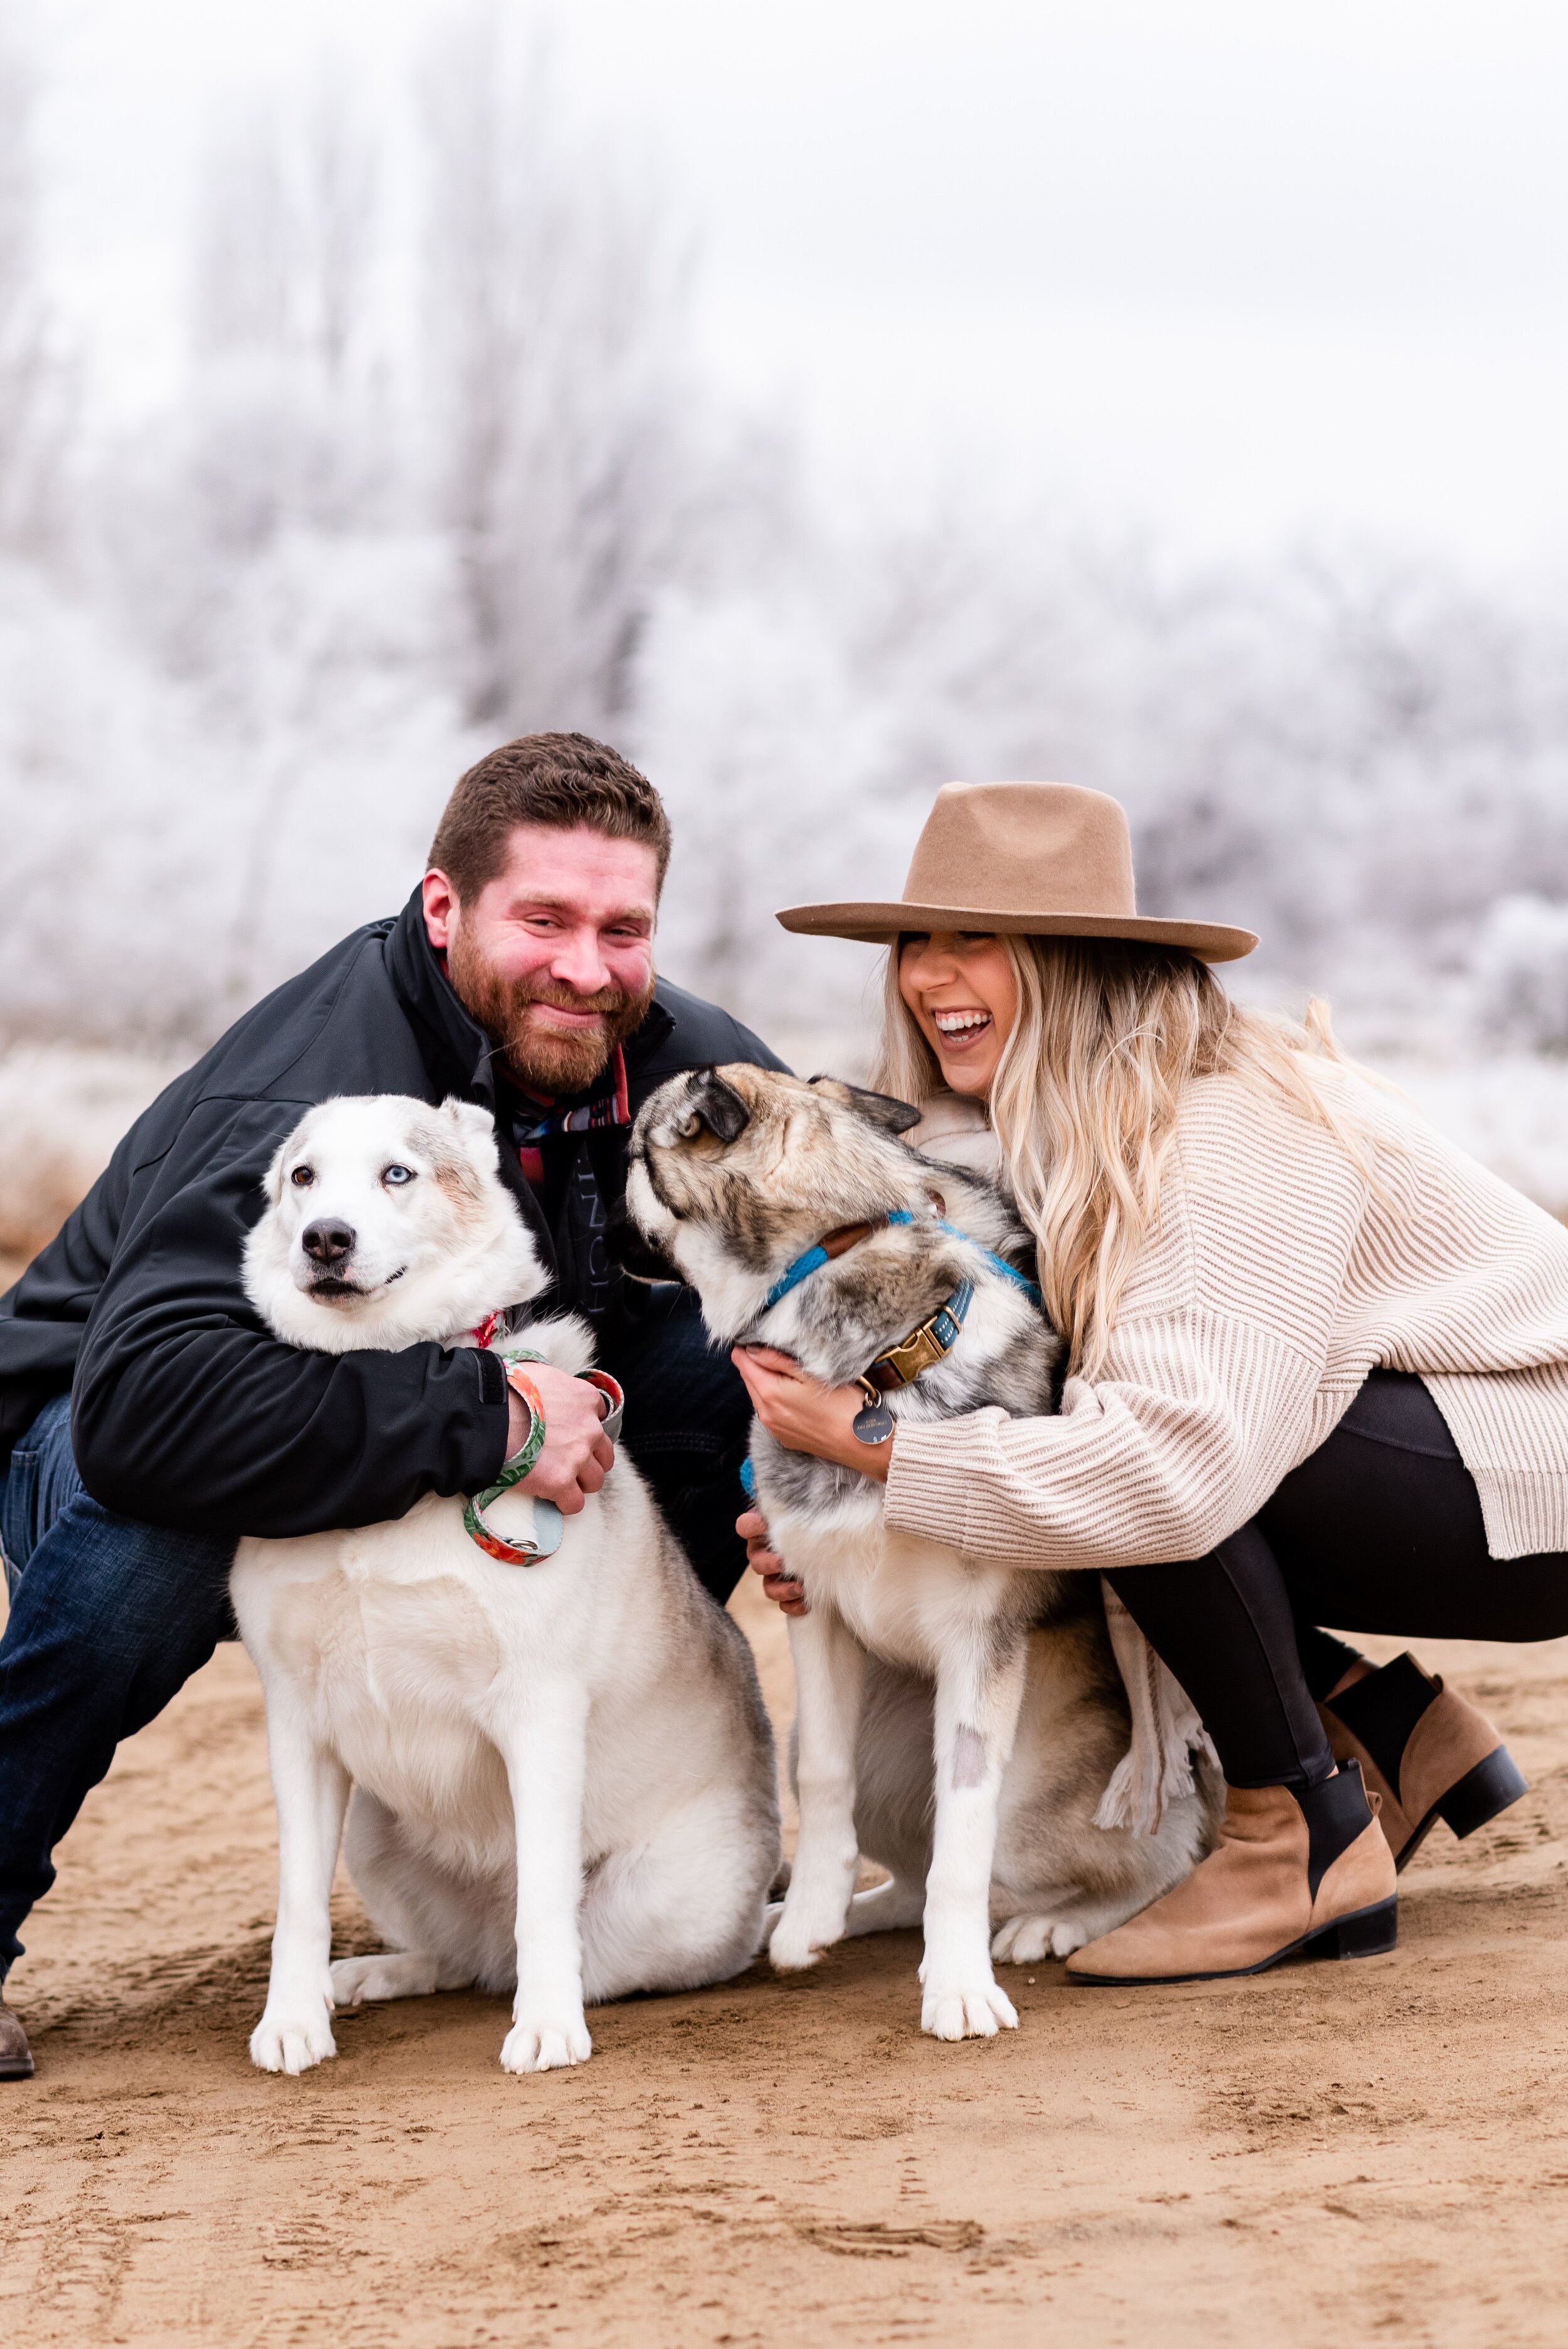 Tri Cities Engagement Couple Photographer - Tri Cities Wedding Photographer - What to Wear for Winter Engagement Photos with Dogs - Winter Engagement Session Outfits - Morgan Tayler Photo &amp; Design